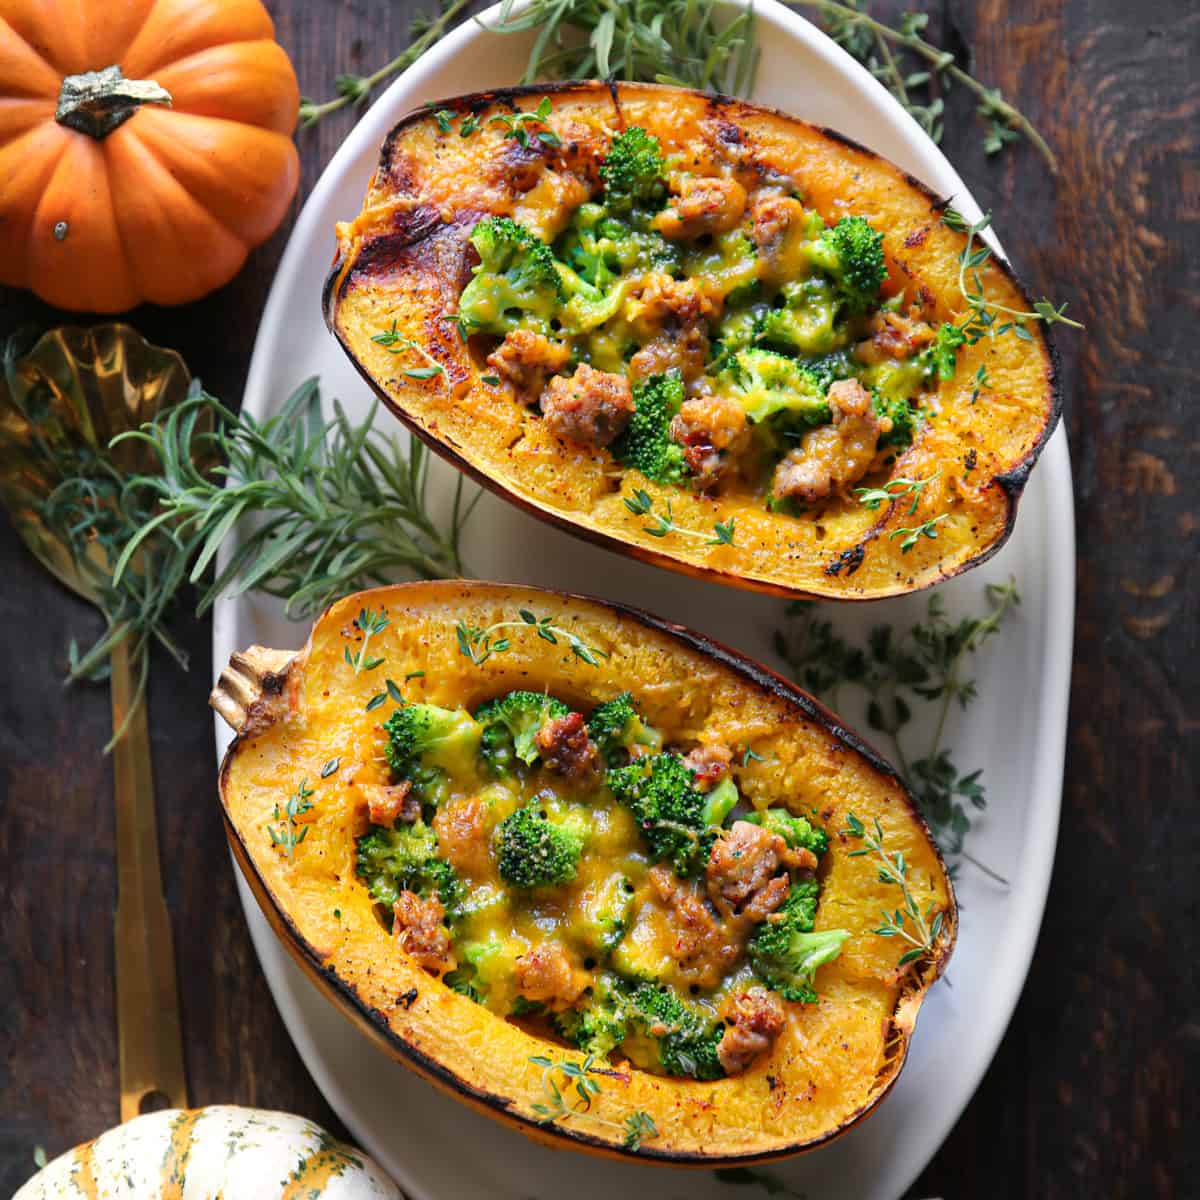 Stuffed Roasted Spaghetti Squash Halves (2) with Broccoli, Sausage, and Cheddar Cheese - on a white platter.